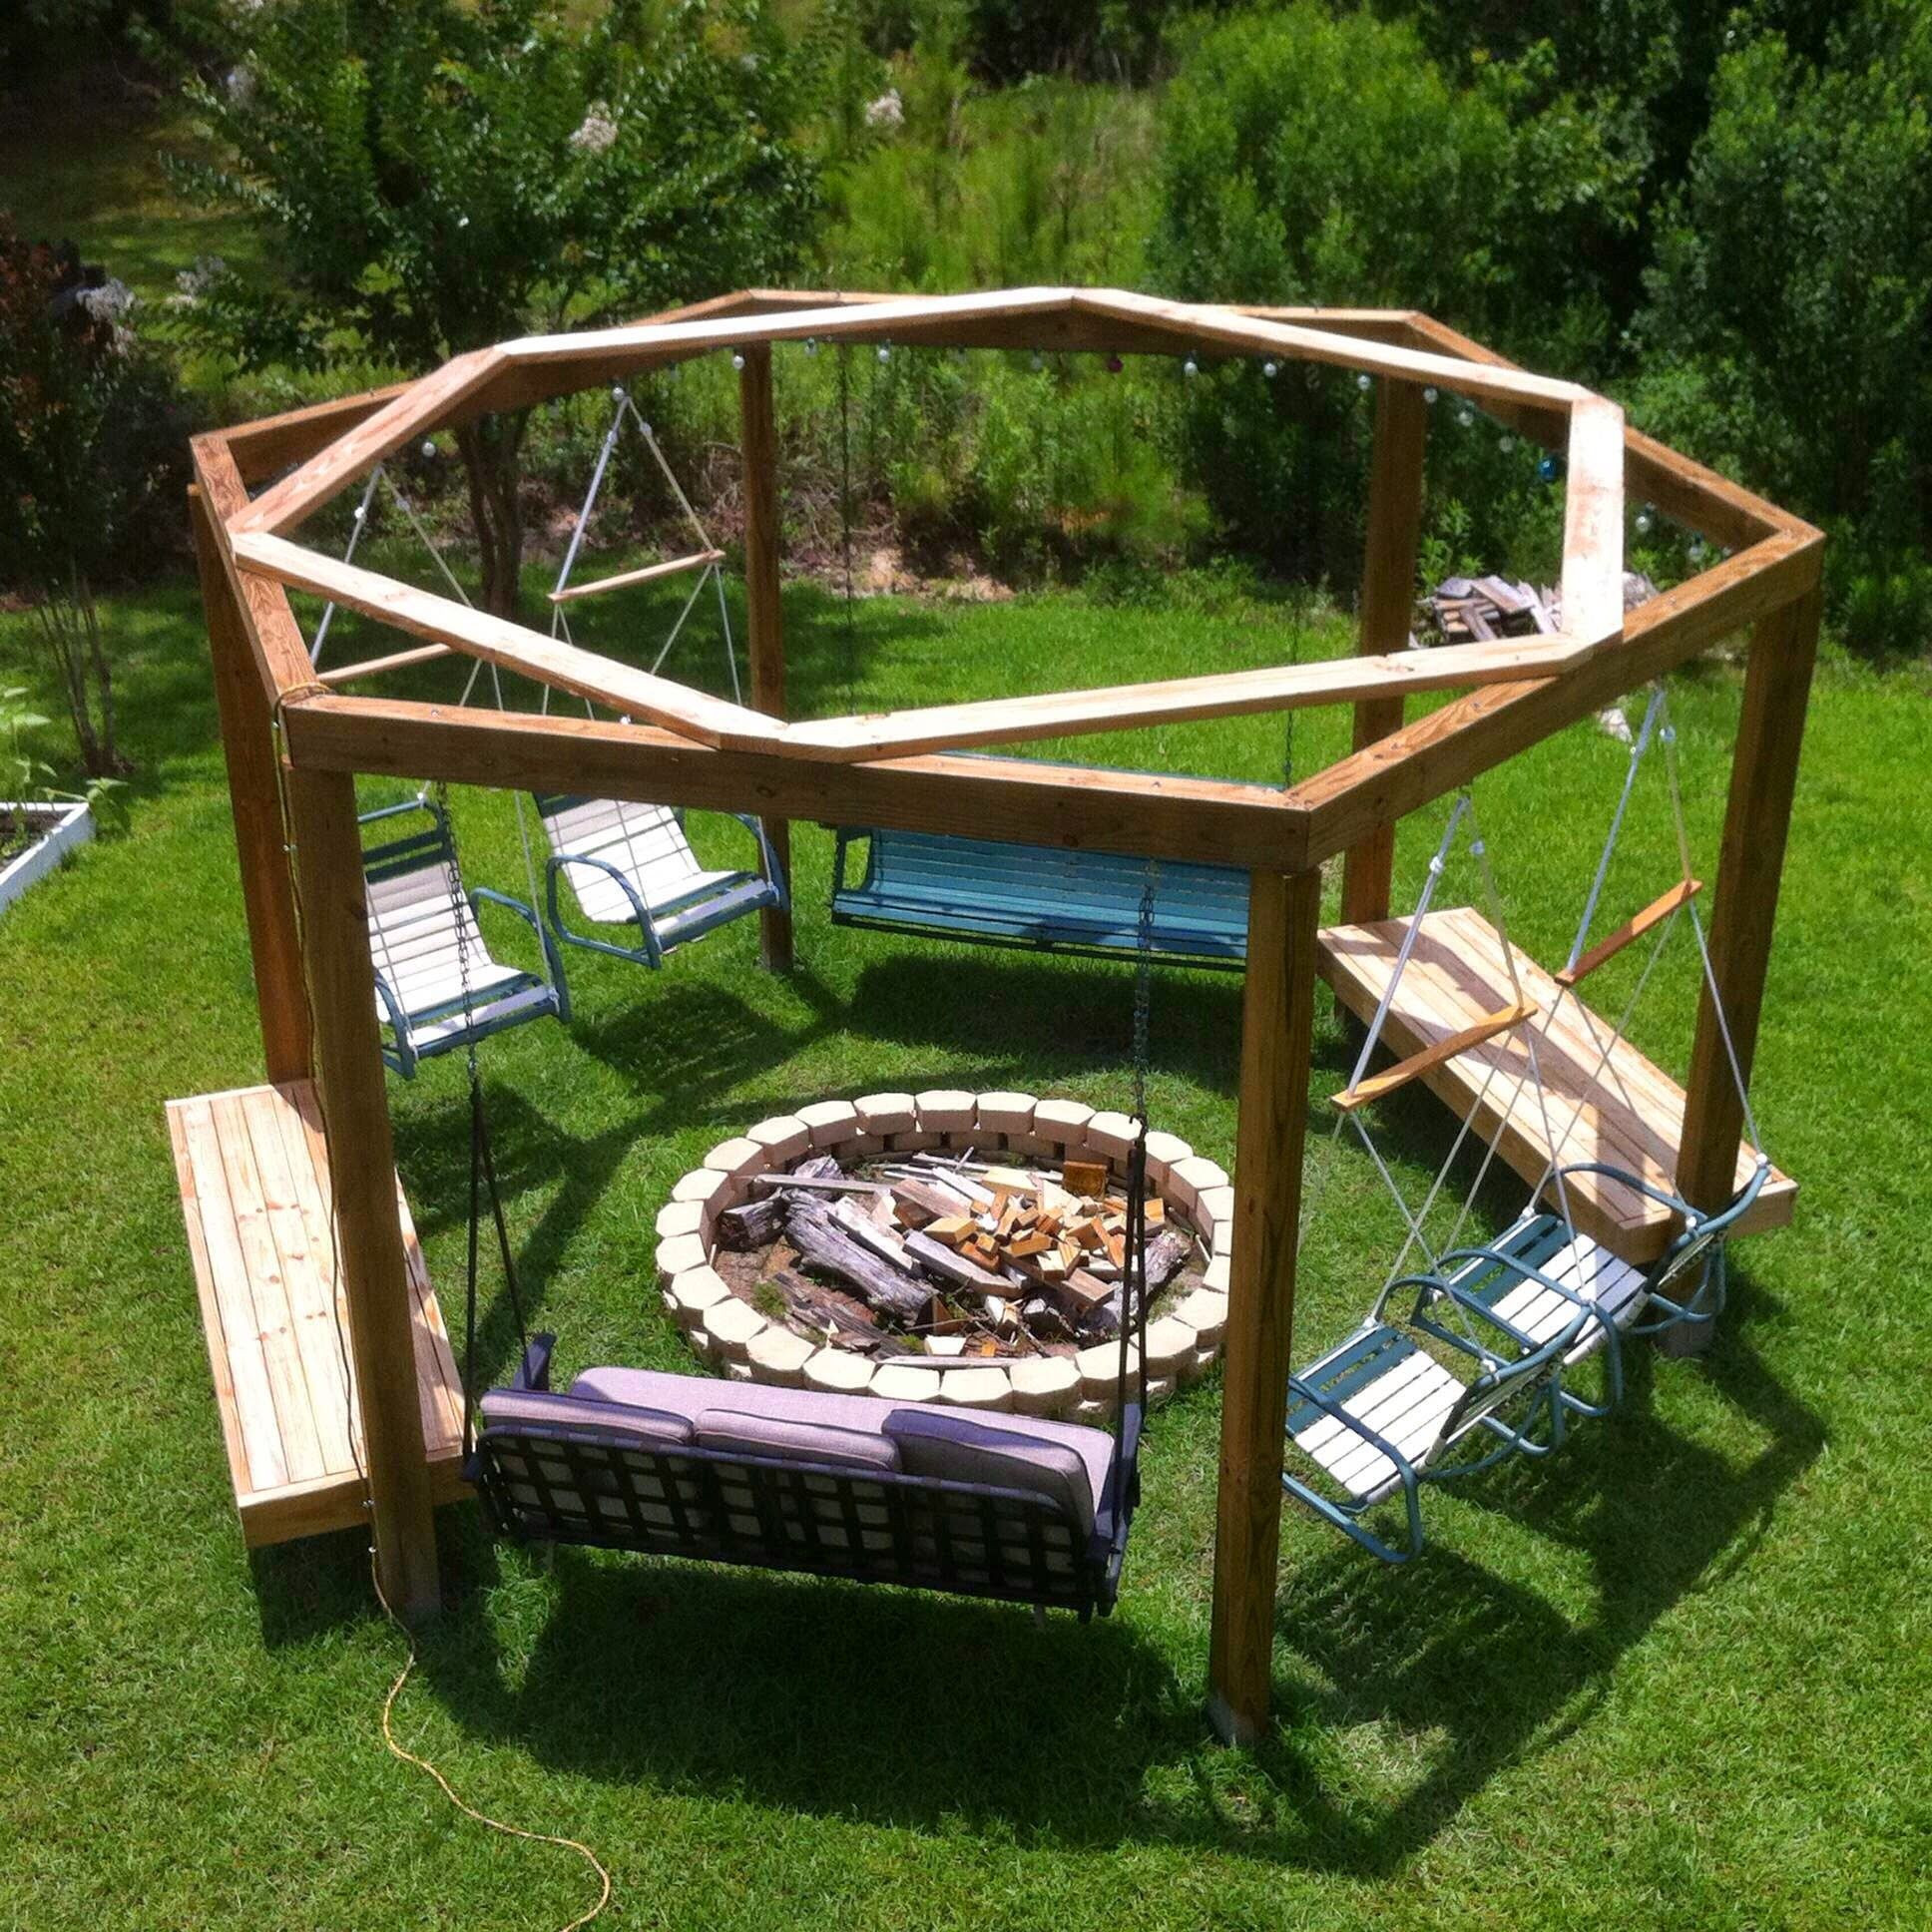 Swinging Bench Fire Pit
 Hexagonal fire pit swingset with repurposed lawn chairs